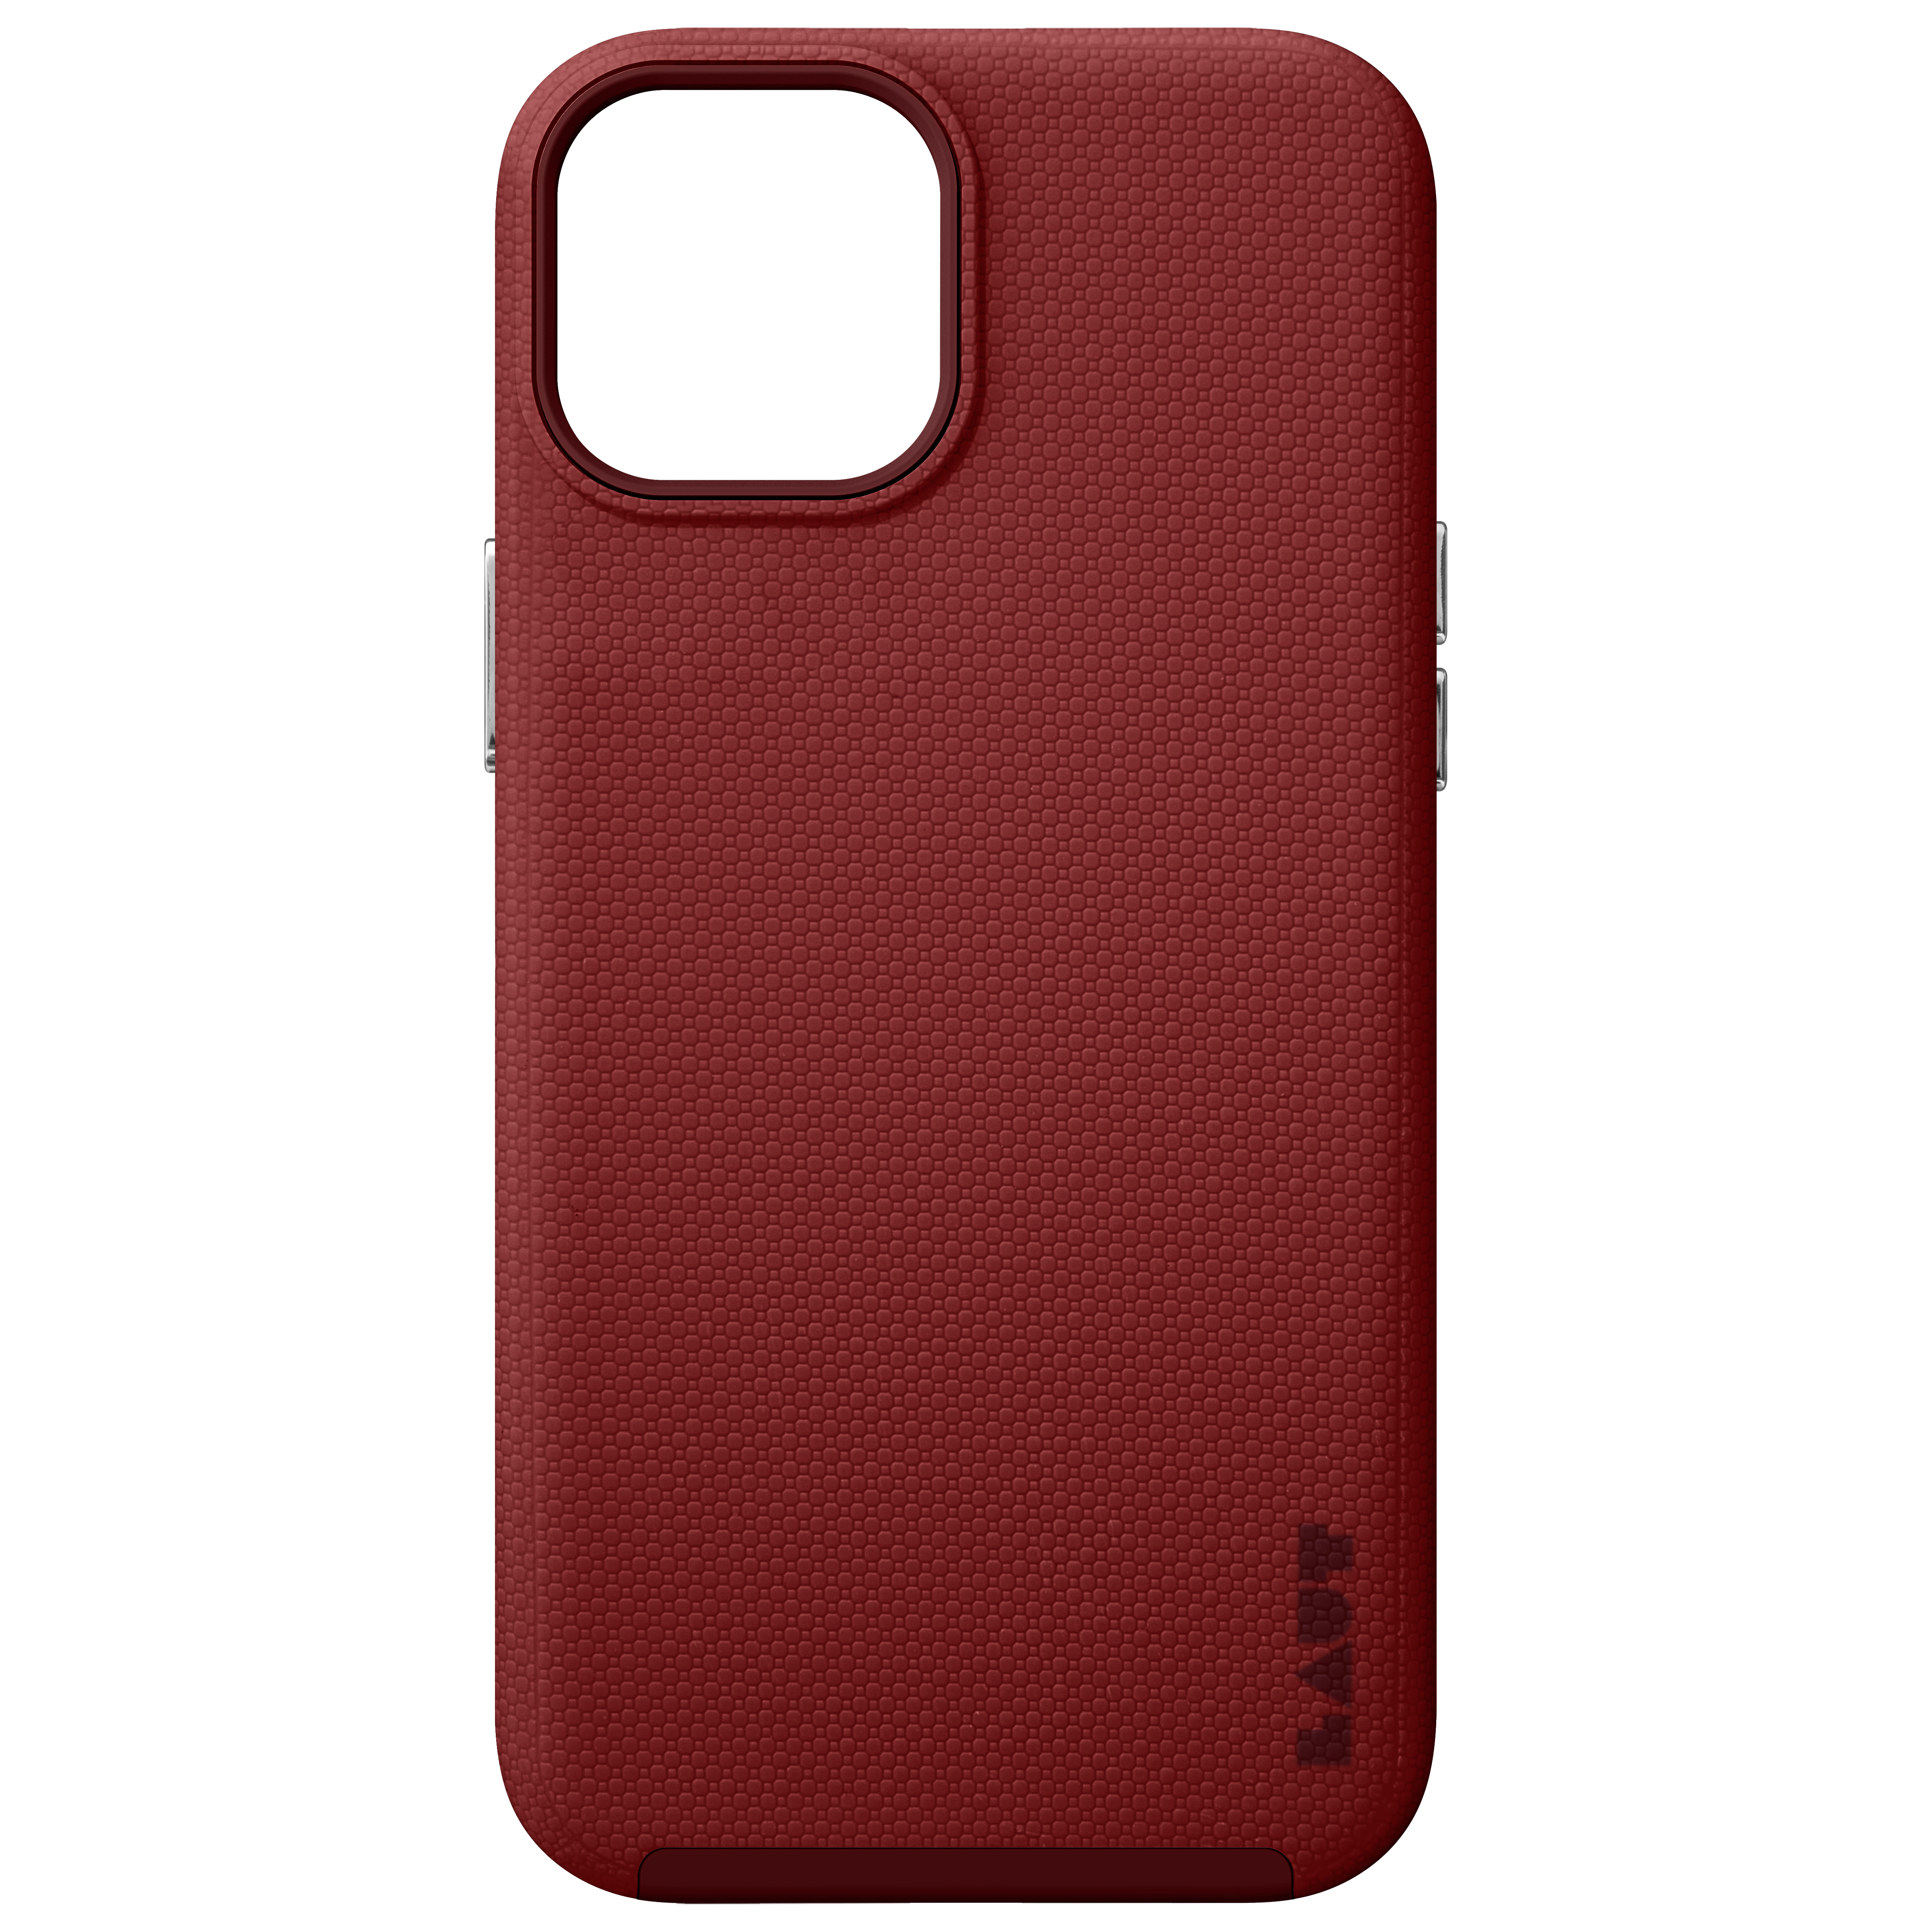 IPHONE MINI, 13 APPLE, LAUT RED Backcover, Shield,